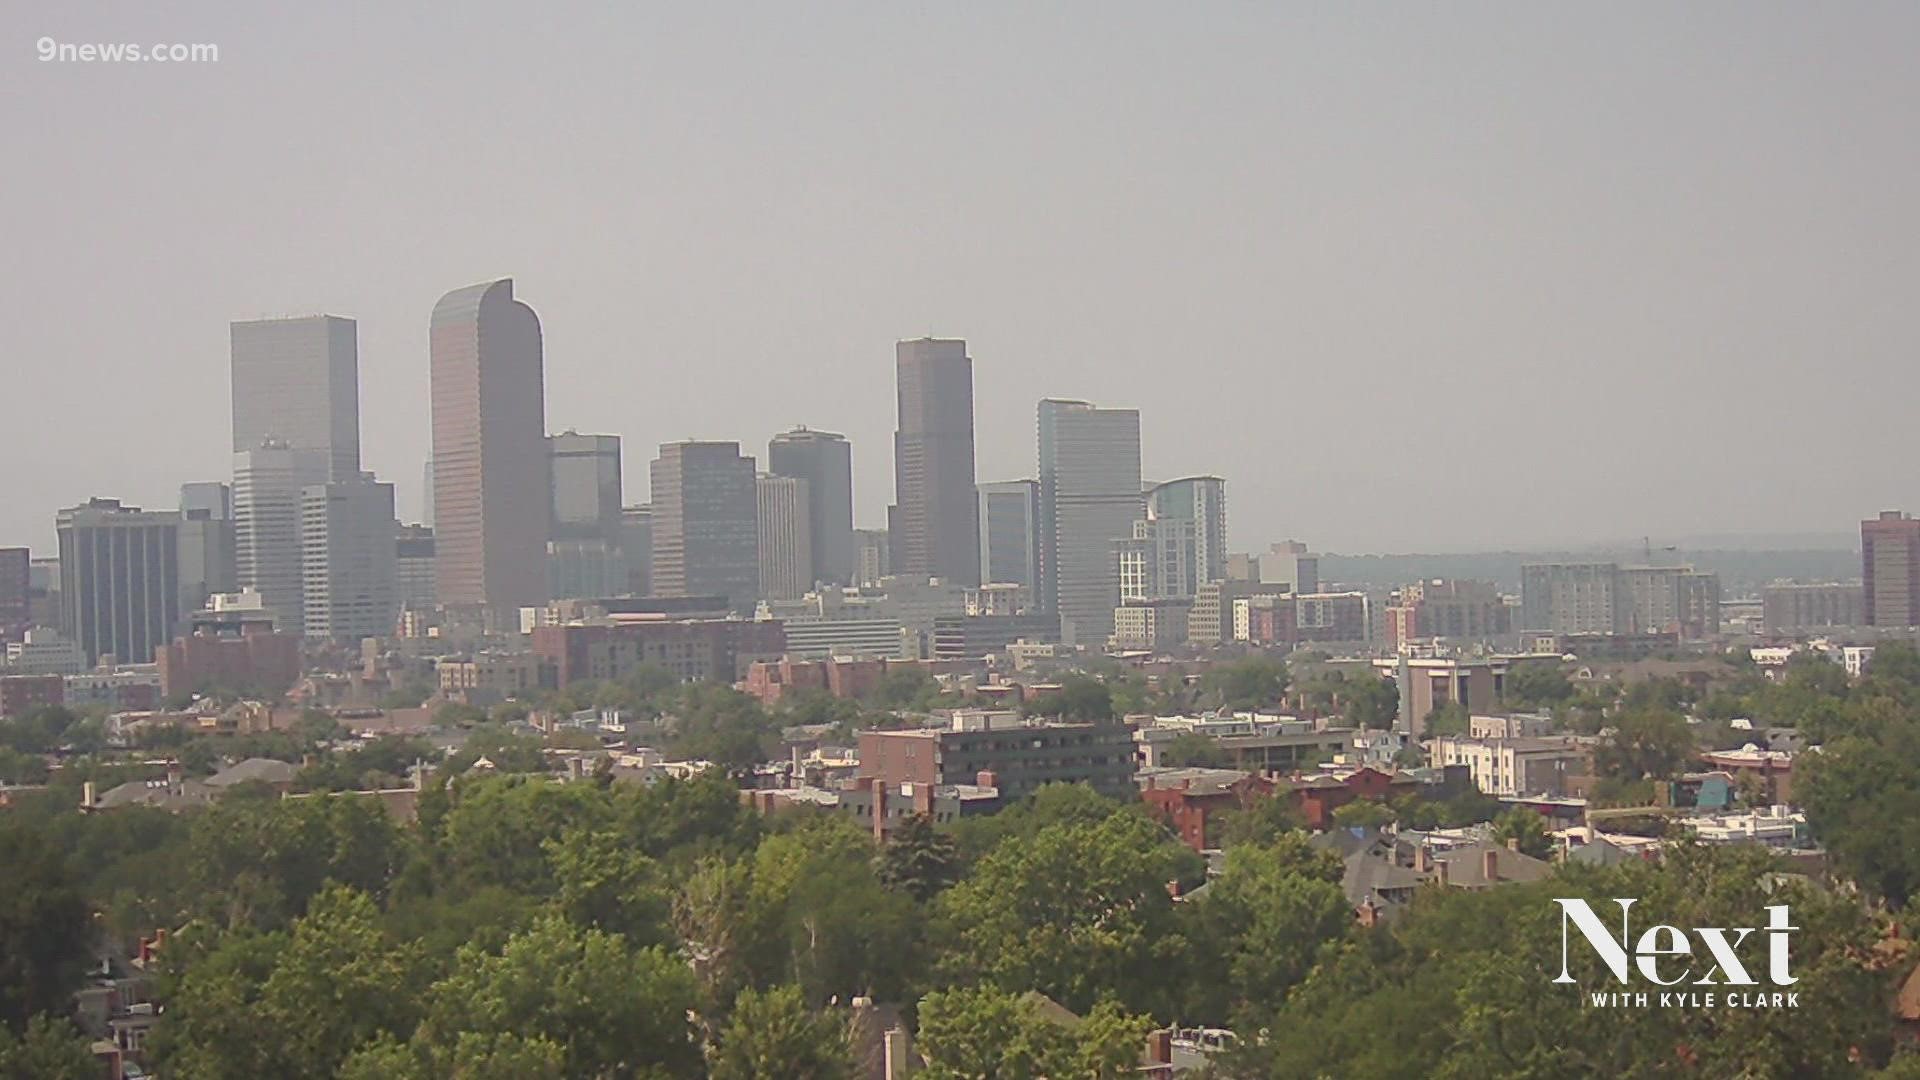 The view of the foothills from Denver was gradually covered up again by wildfire smoke Monday but that smoke may have also helped to keep our air cleaner.